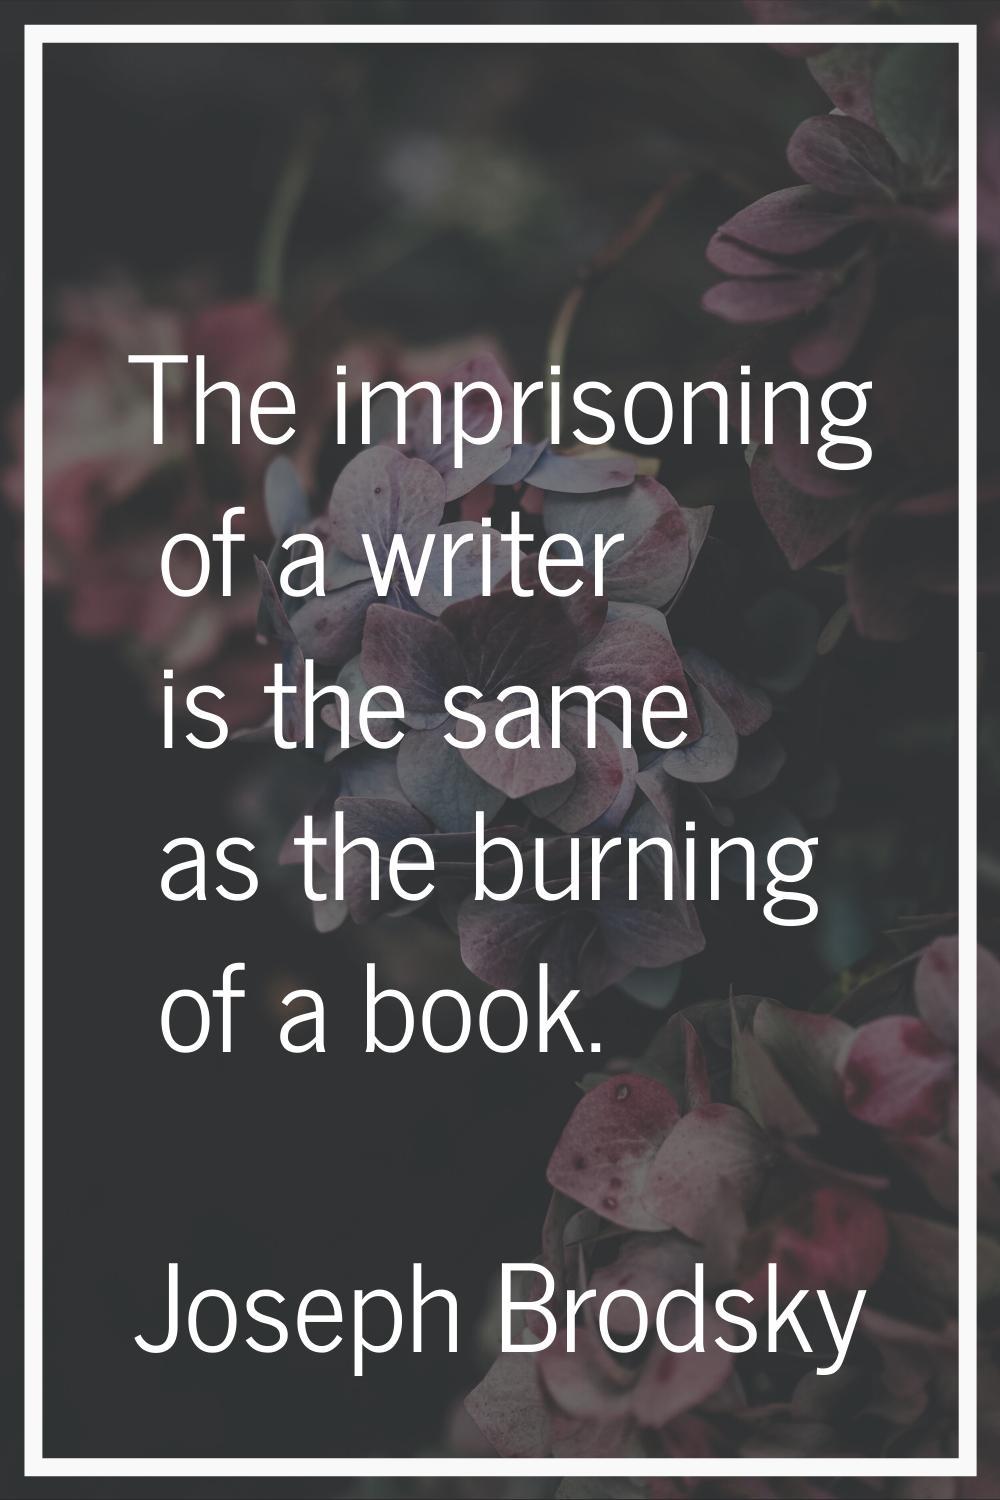 The imprisoning of a writer is the same as the burning of a book.